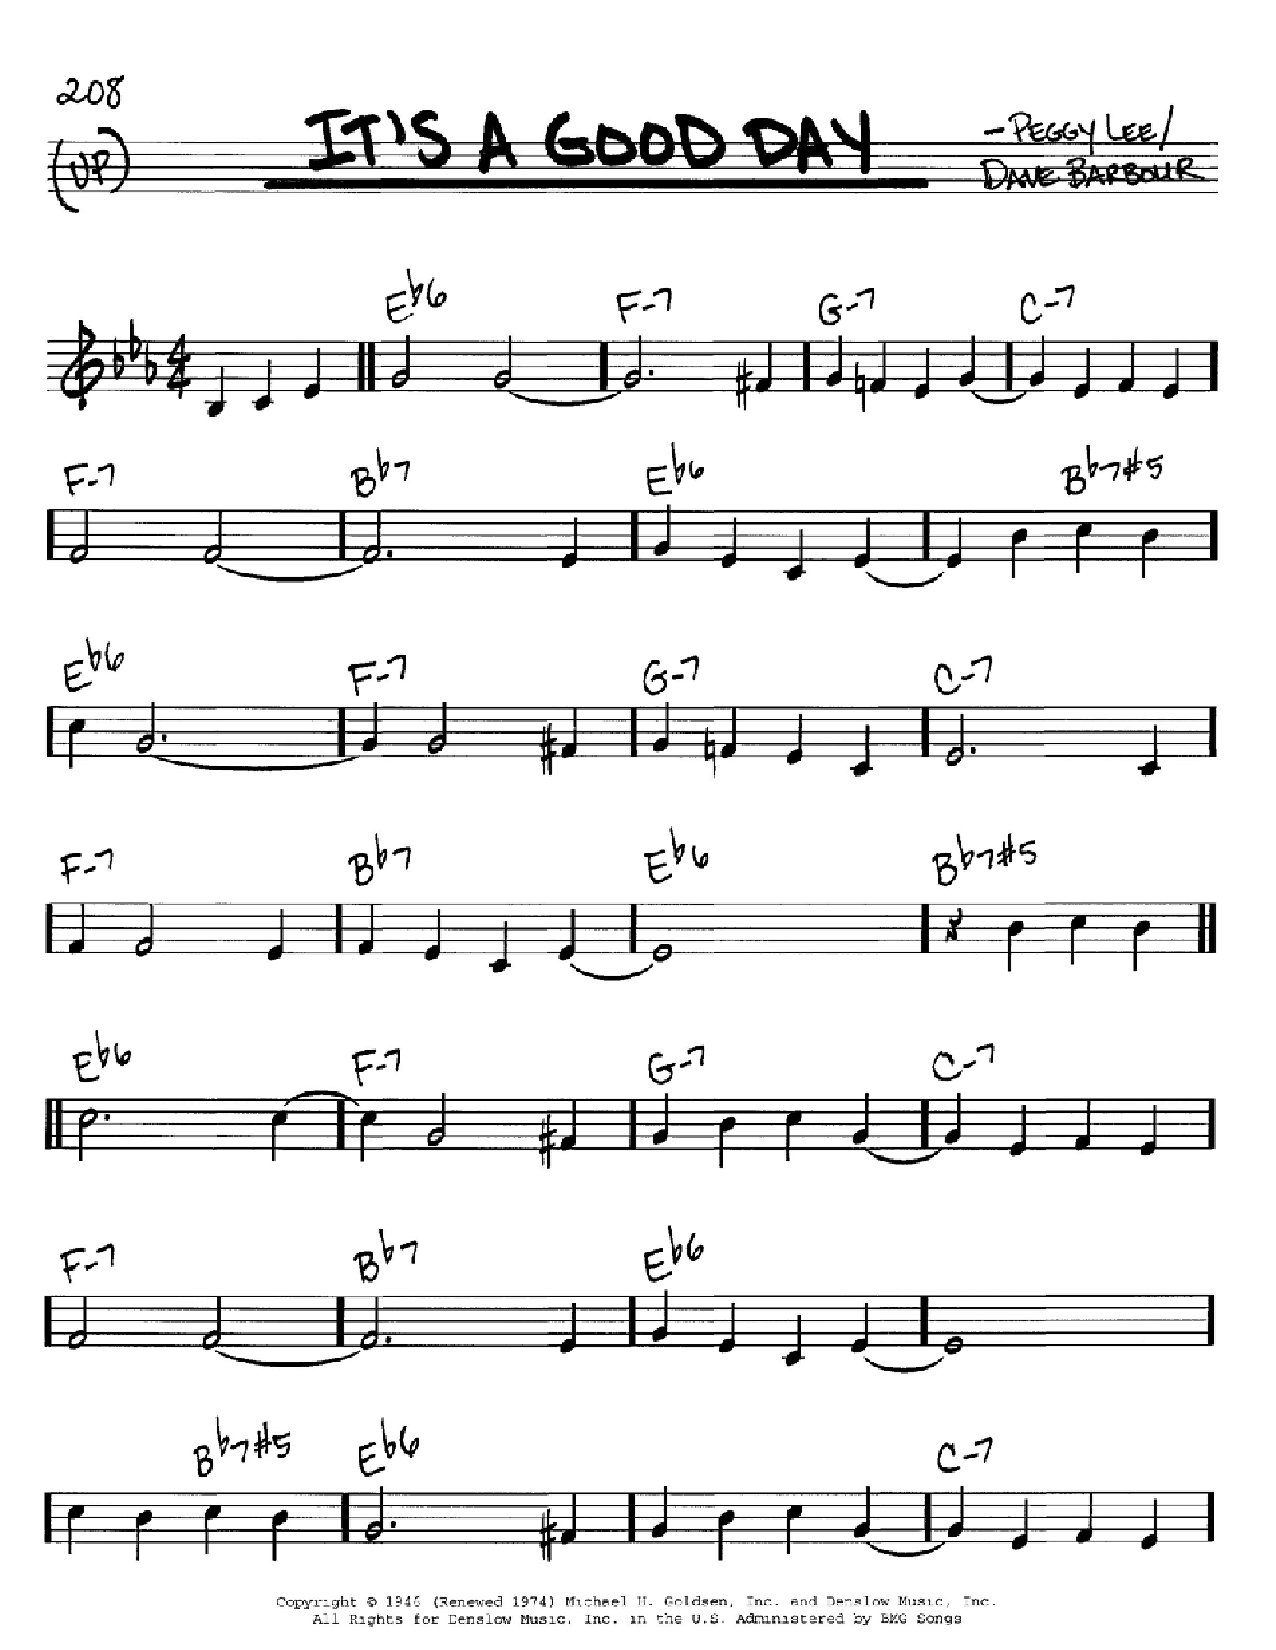 Peggy Lee It's A Good Day sheet music notes and chords. Download Printable PDF.